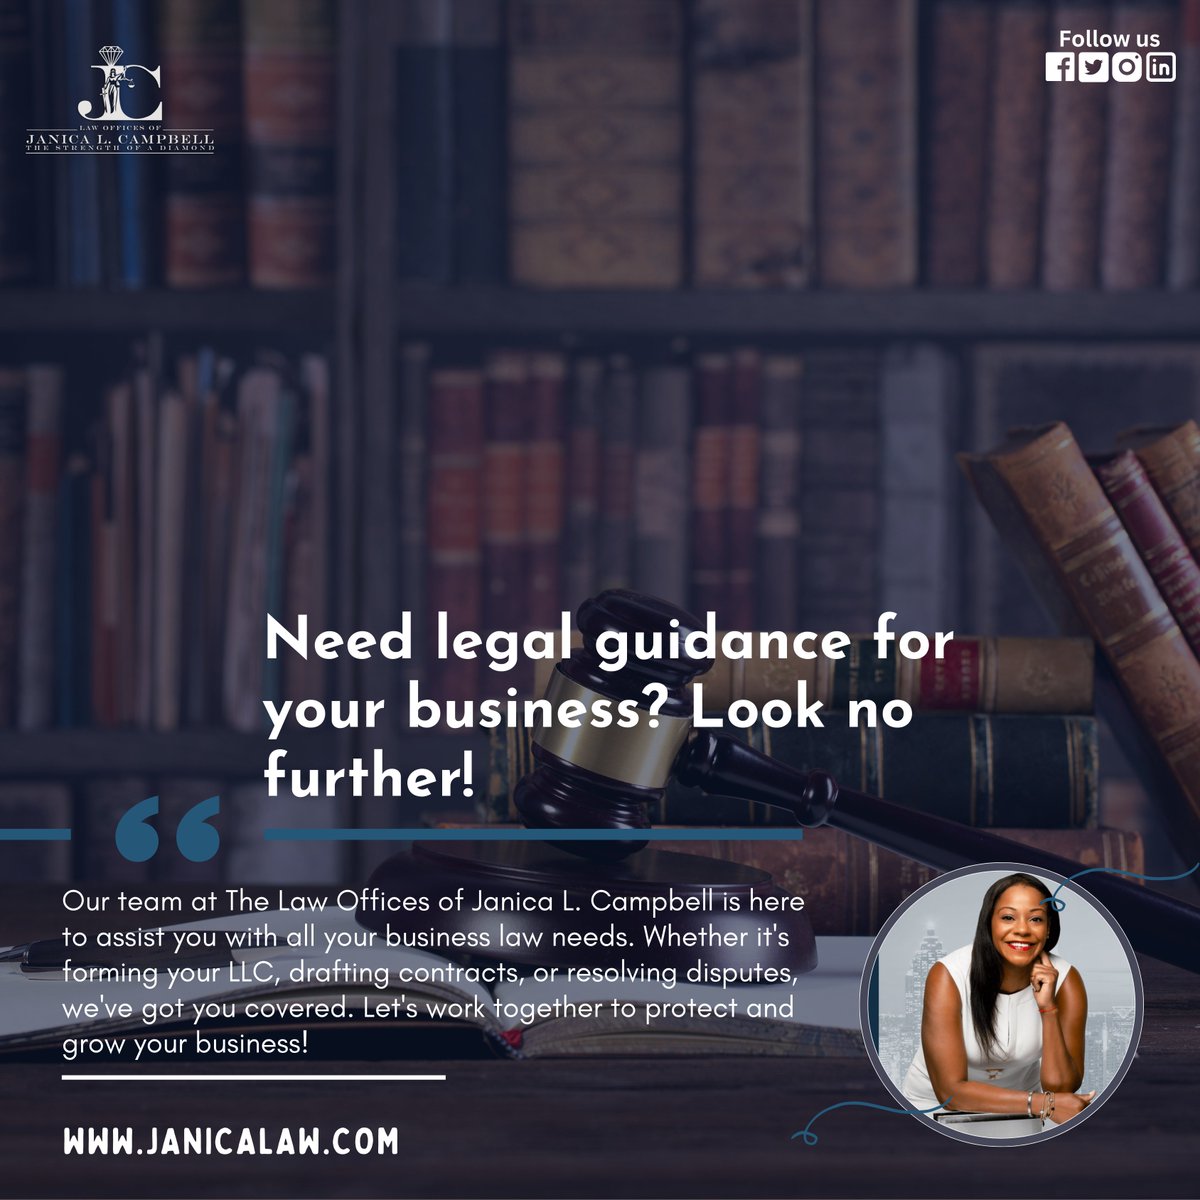 🔍 Need legal guidance for your business? Look no further! 💼 Our team at The Law Offices of Janica L. Campbell is here to assist you with all your business law needs.

Visit our website: janicalaw.com 🖥️

#LegalAdvice #BusinessLaw #LLC #Contracts #JusticeForAll